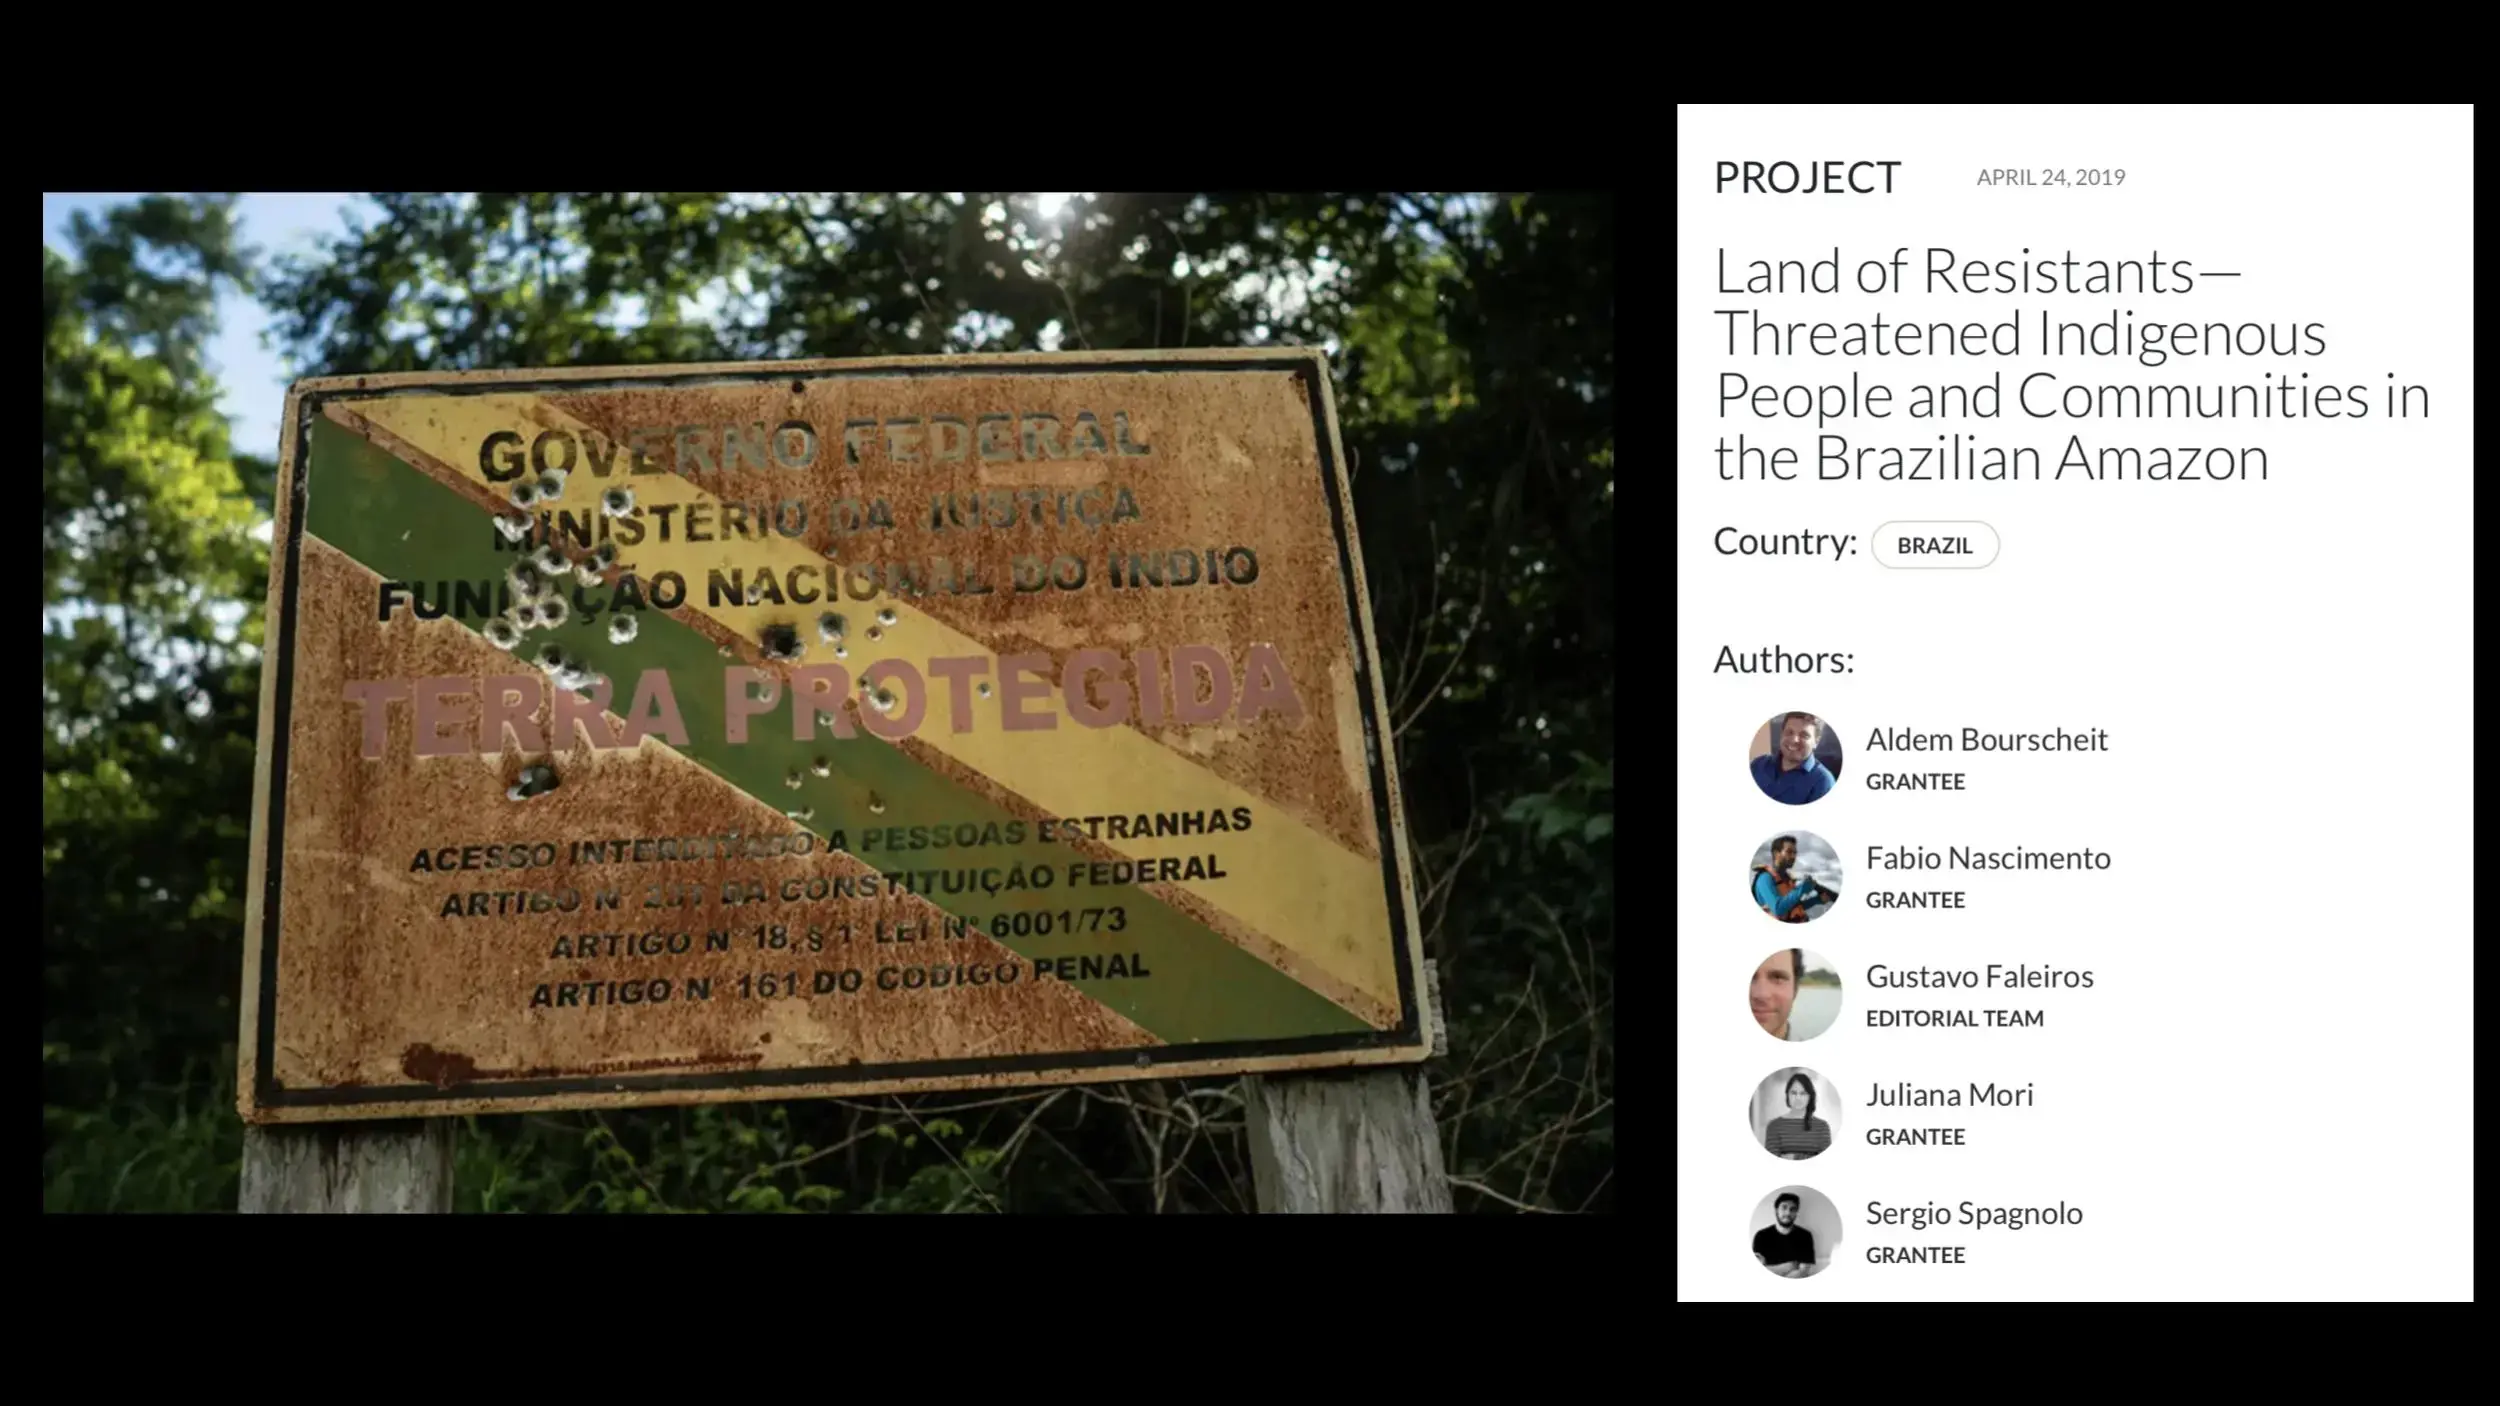 Threatened Indigenous People and Communities in the Brazilian Amazon project